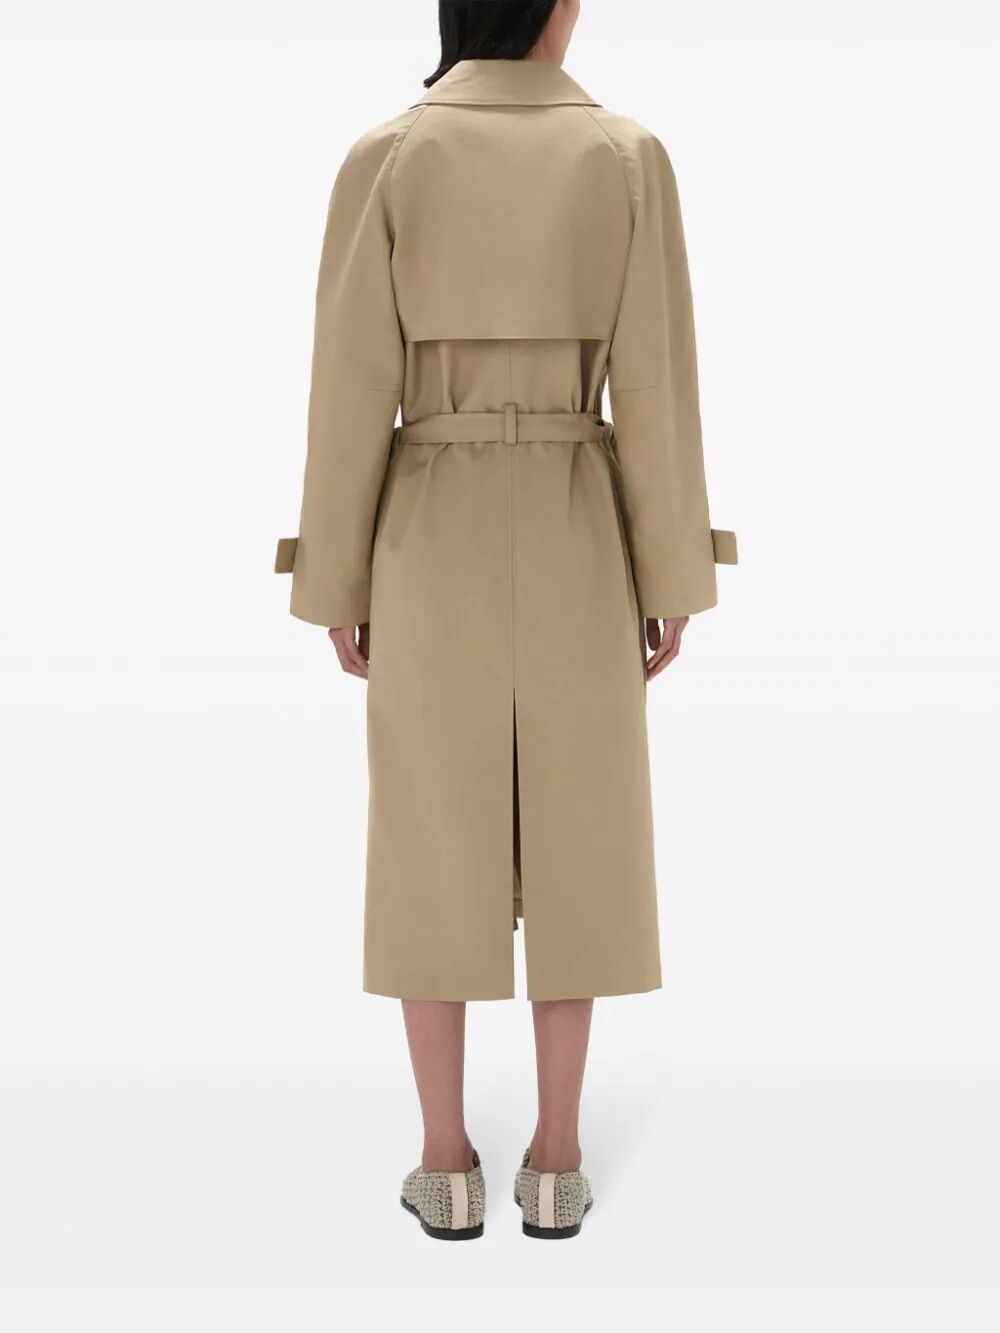 JW ANDERSON-GATHERED WAIST TRENCH COAT-CO0298 PG1529 132